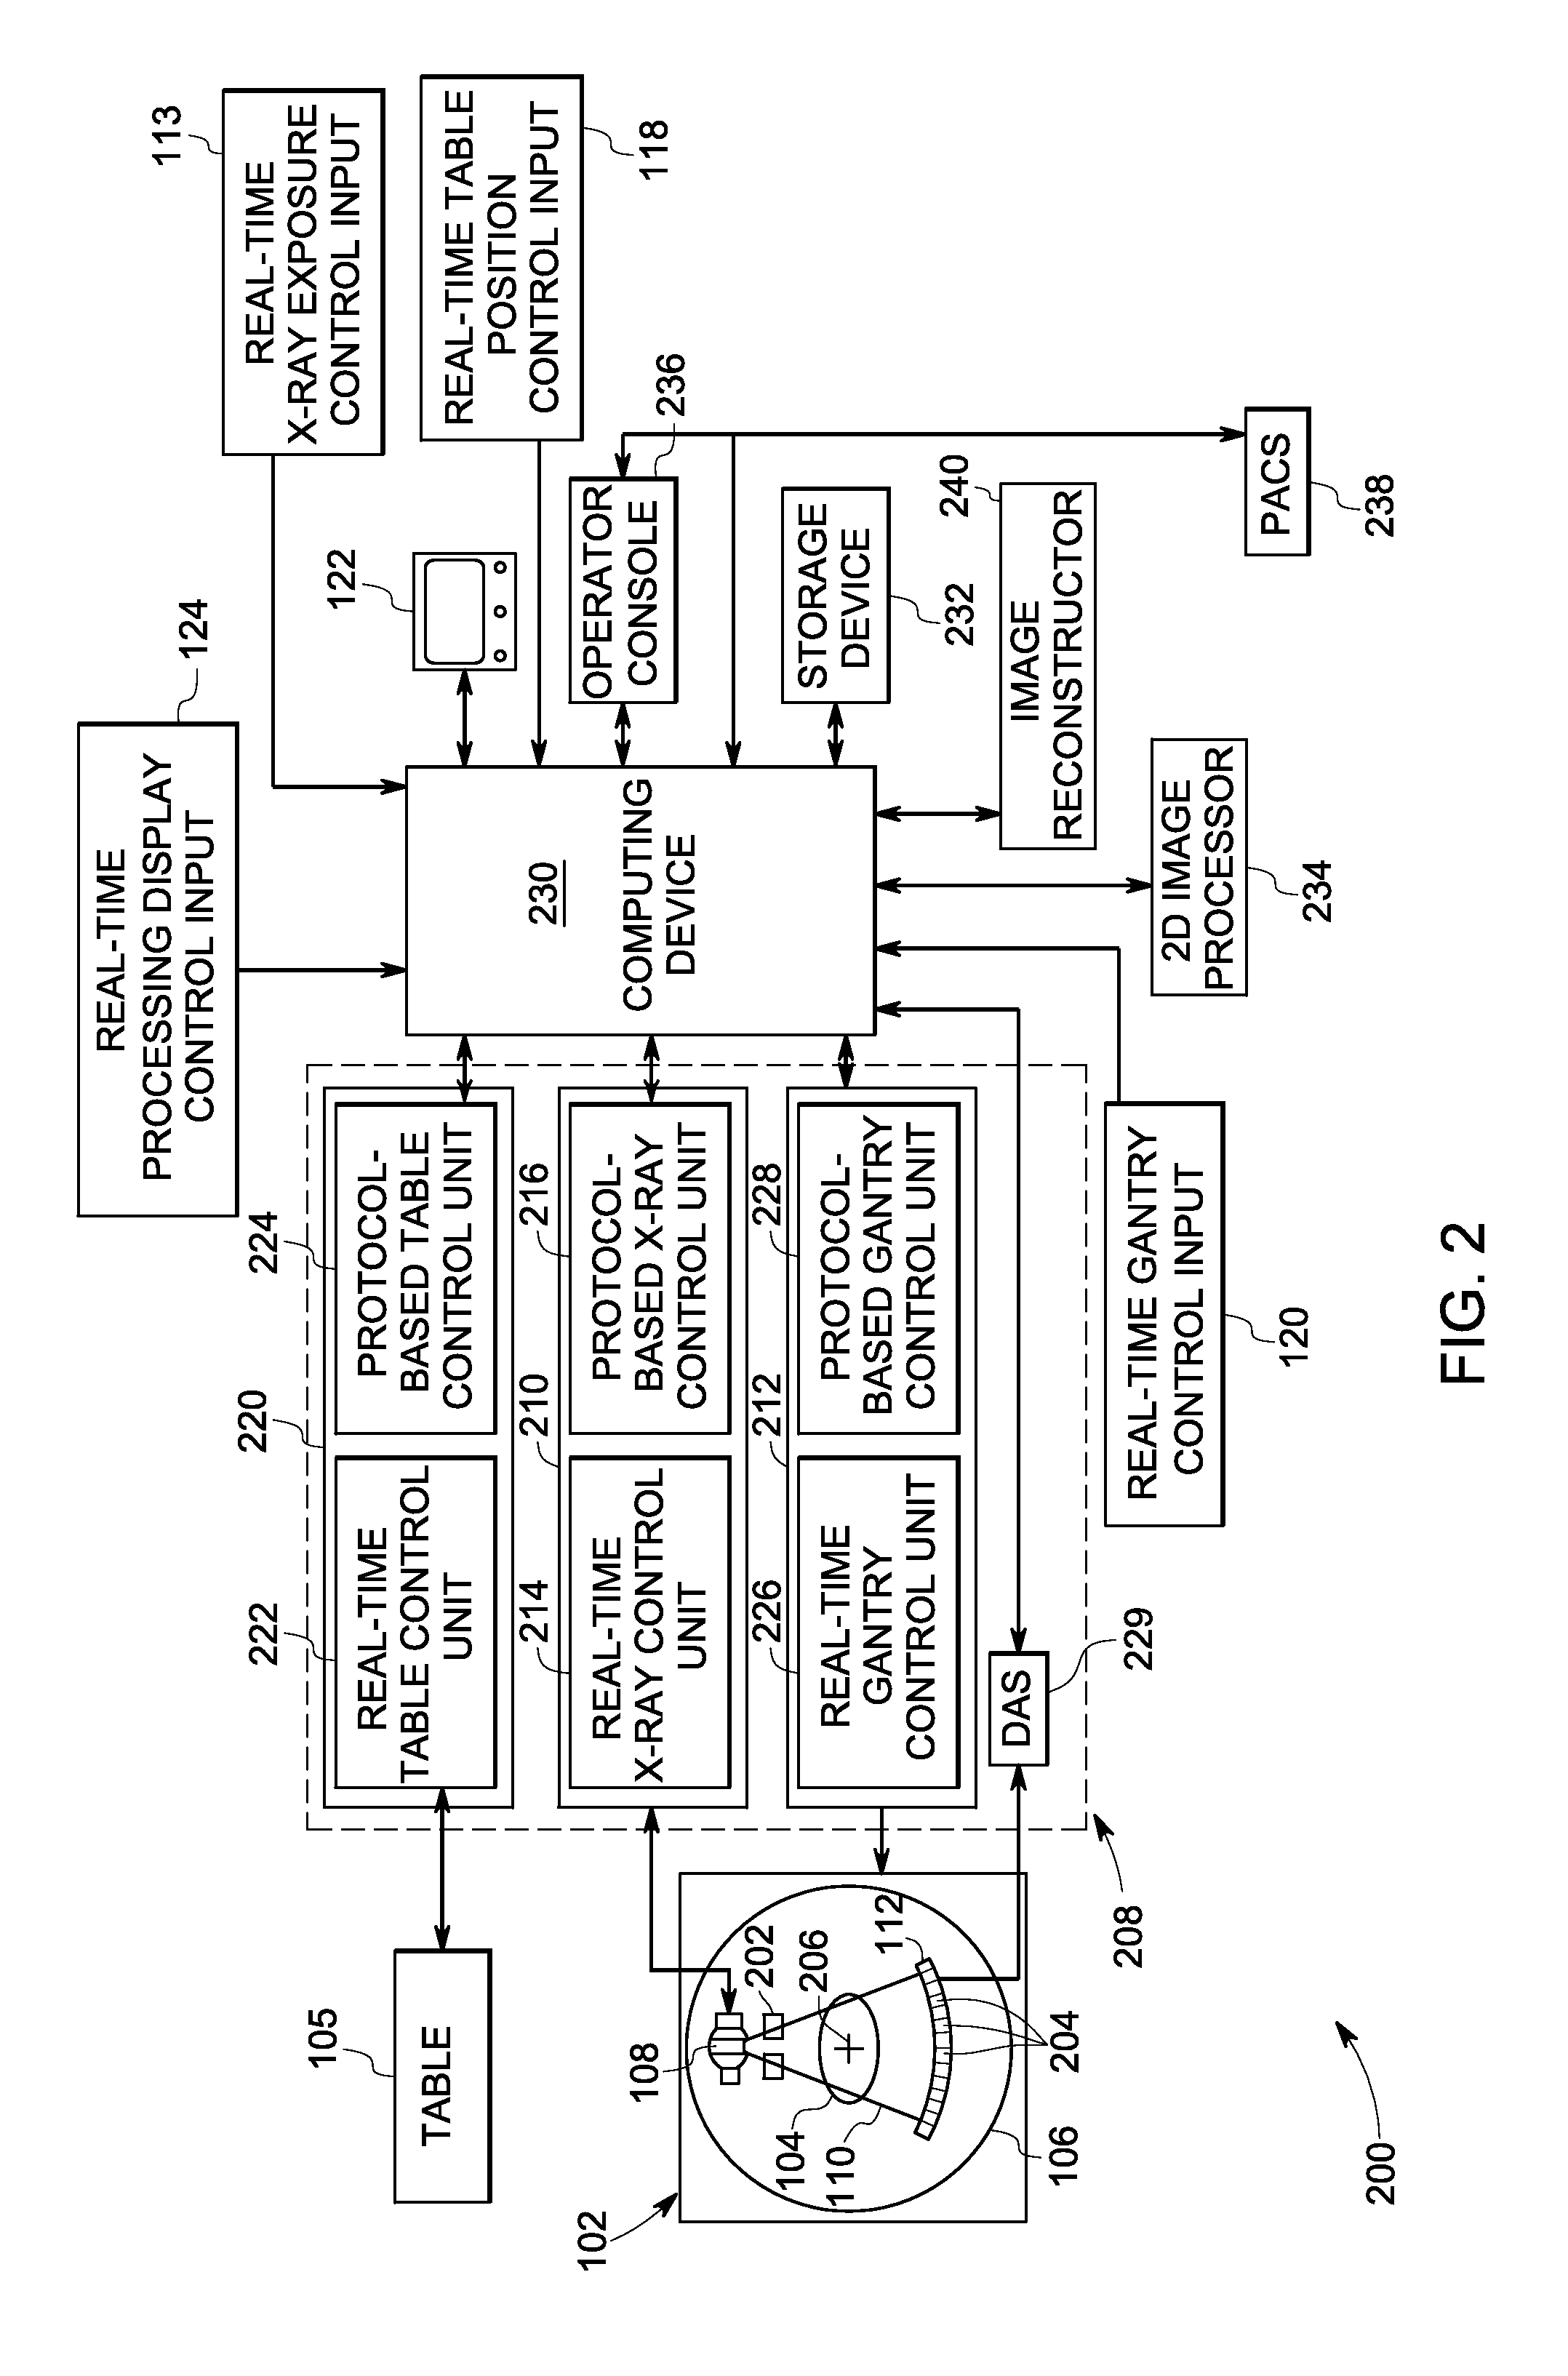 Systems and methods for interventional imaging